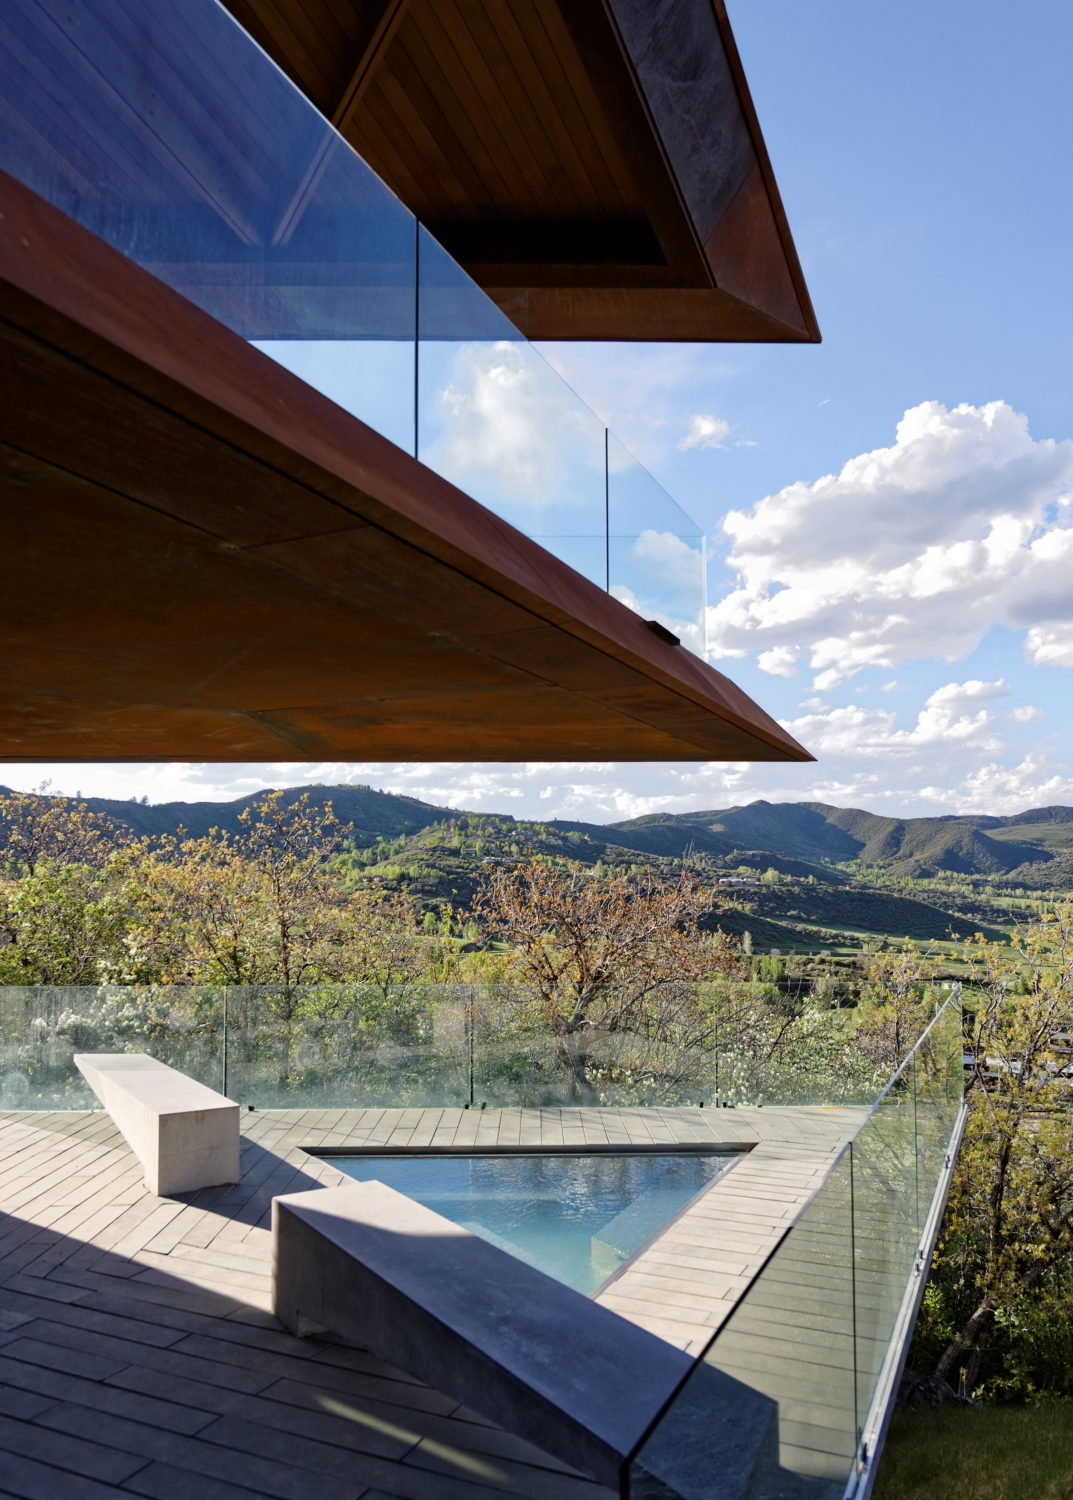 Owl Creek Residence by Skylab Architecture